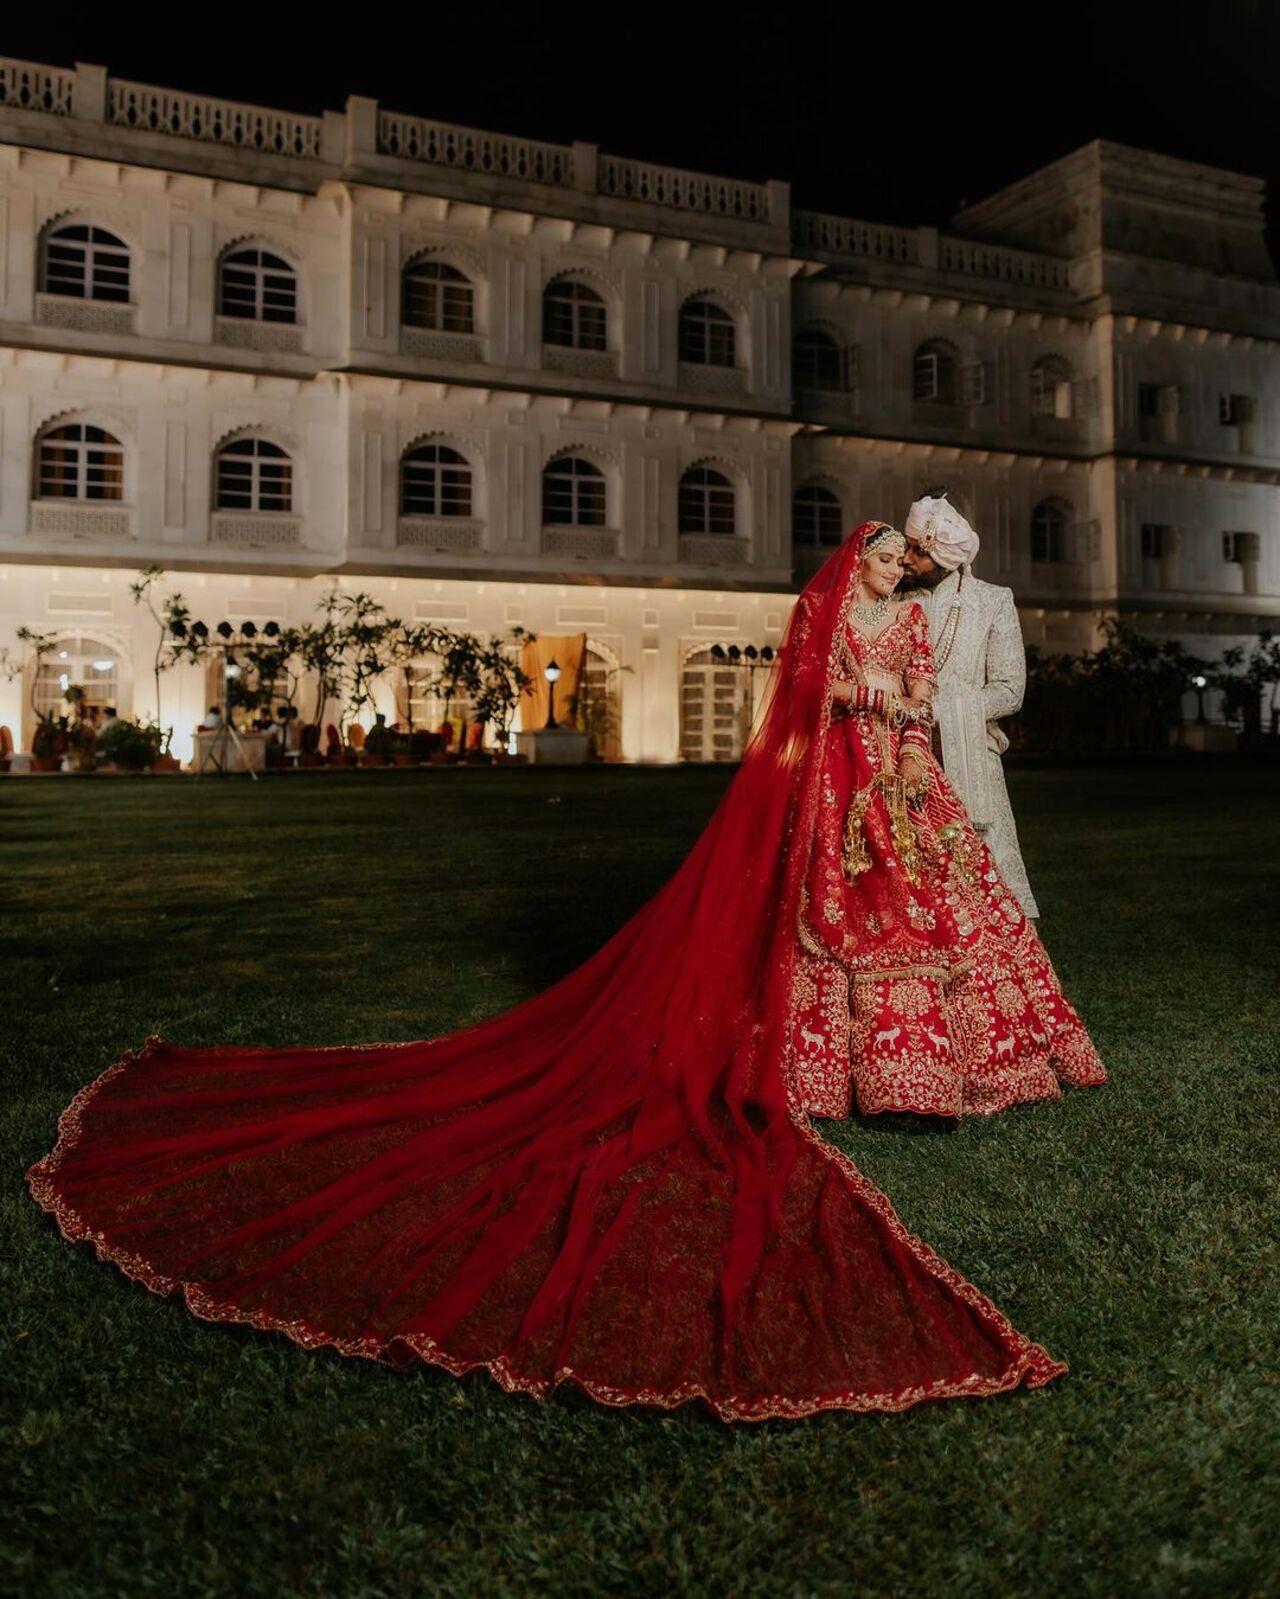 The actress has been sharing stunning pictures from her wedding album on her Instagram feed